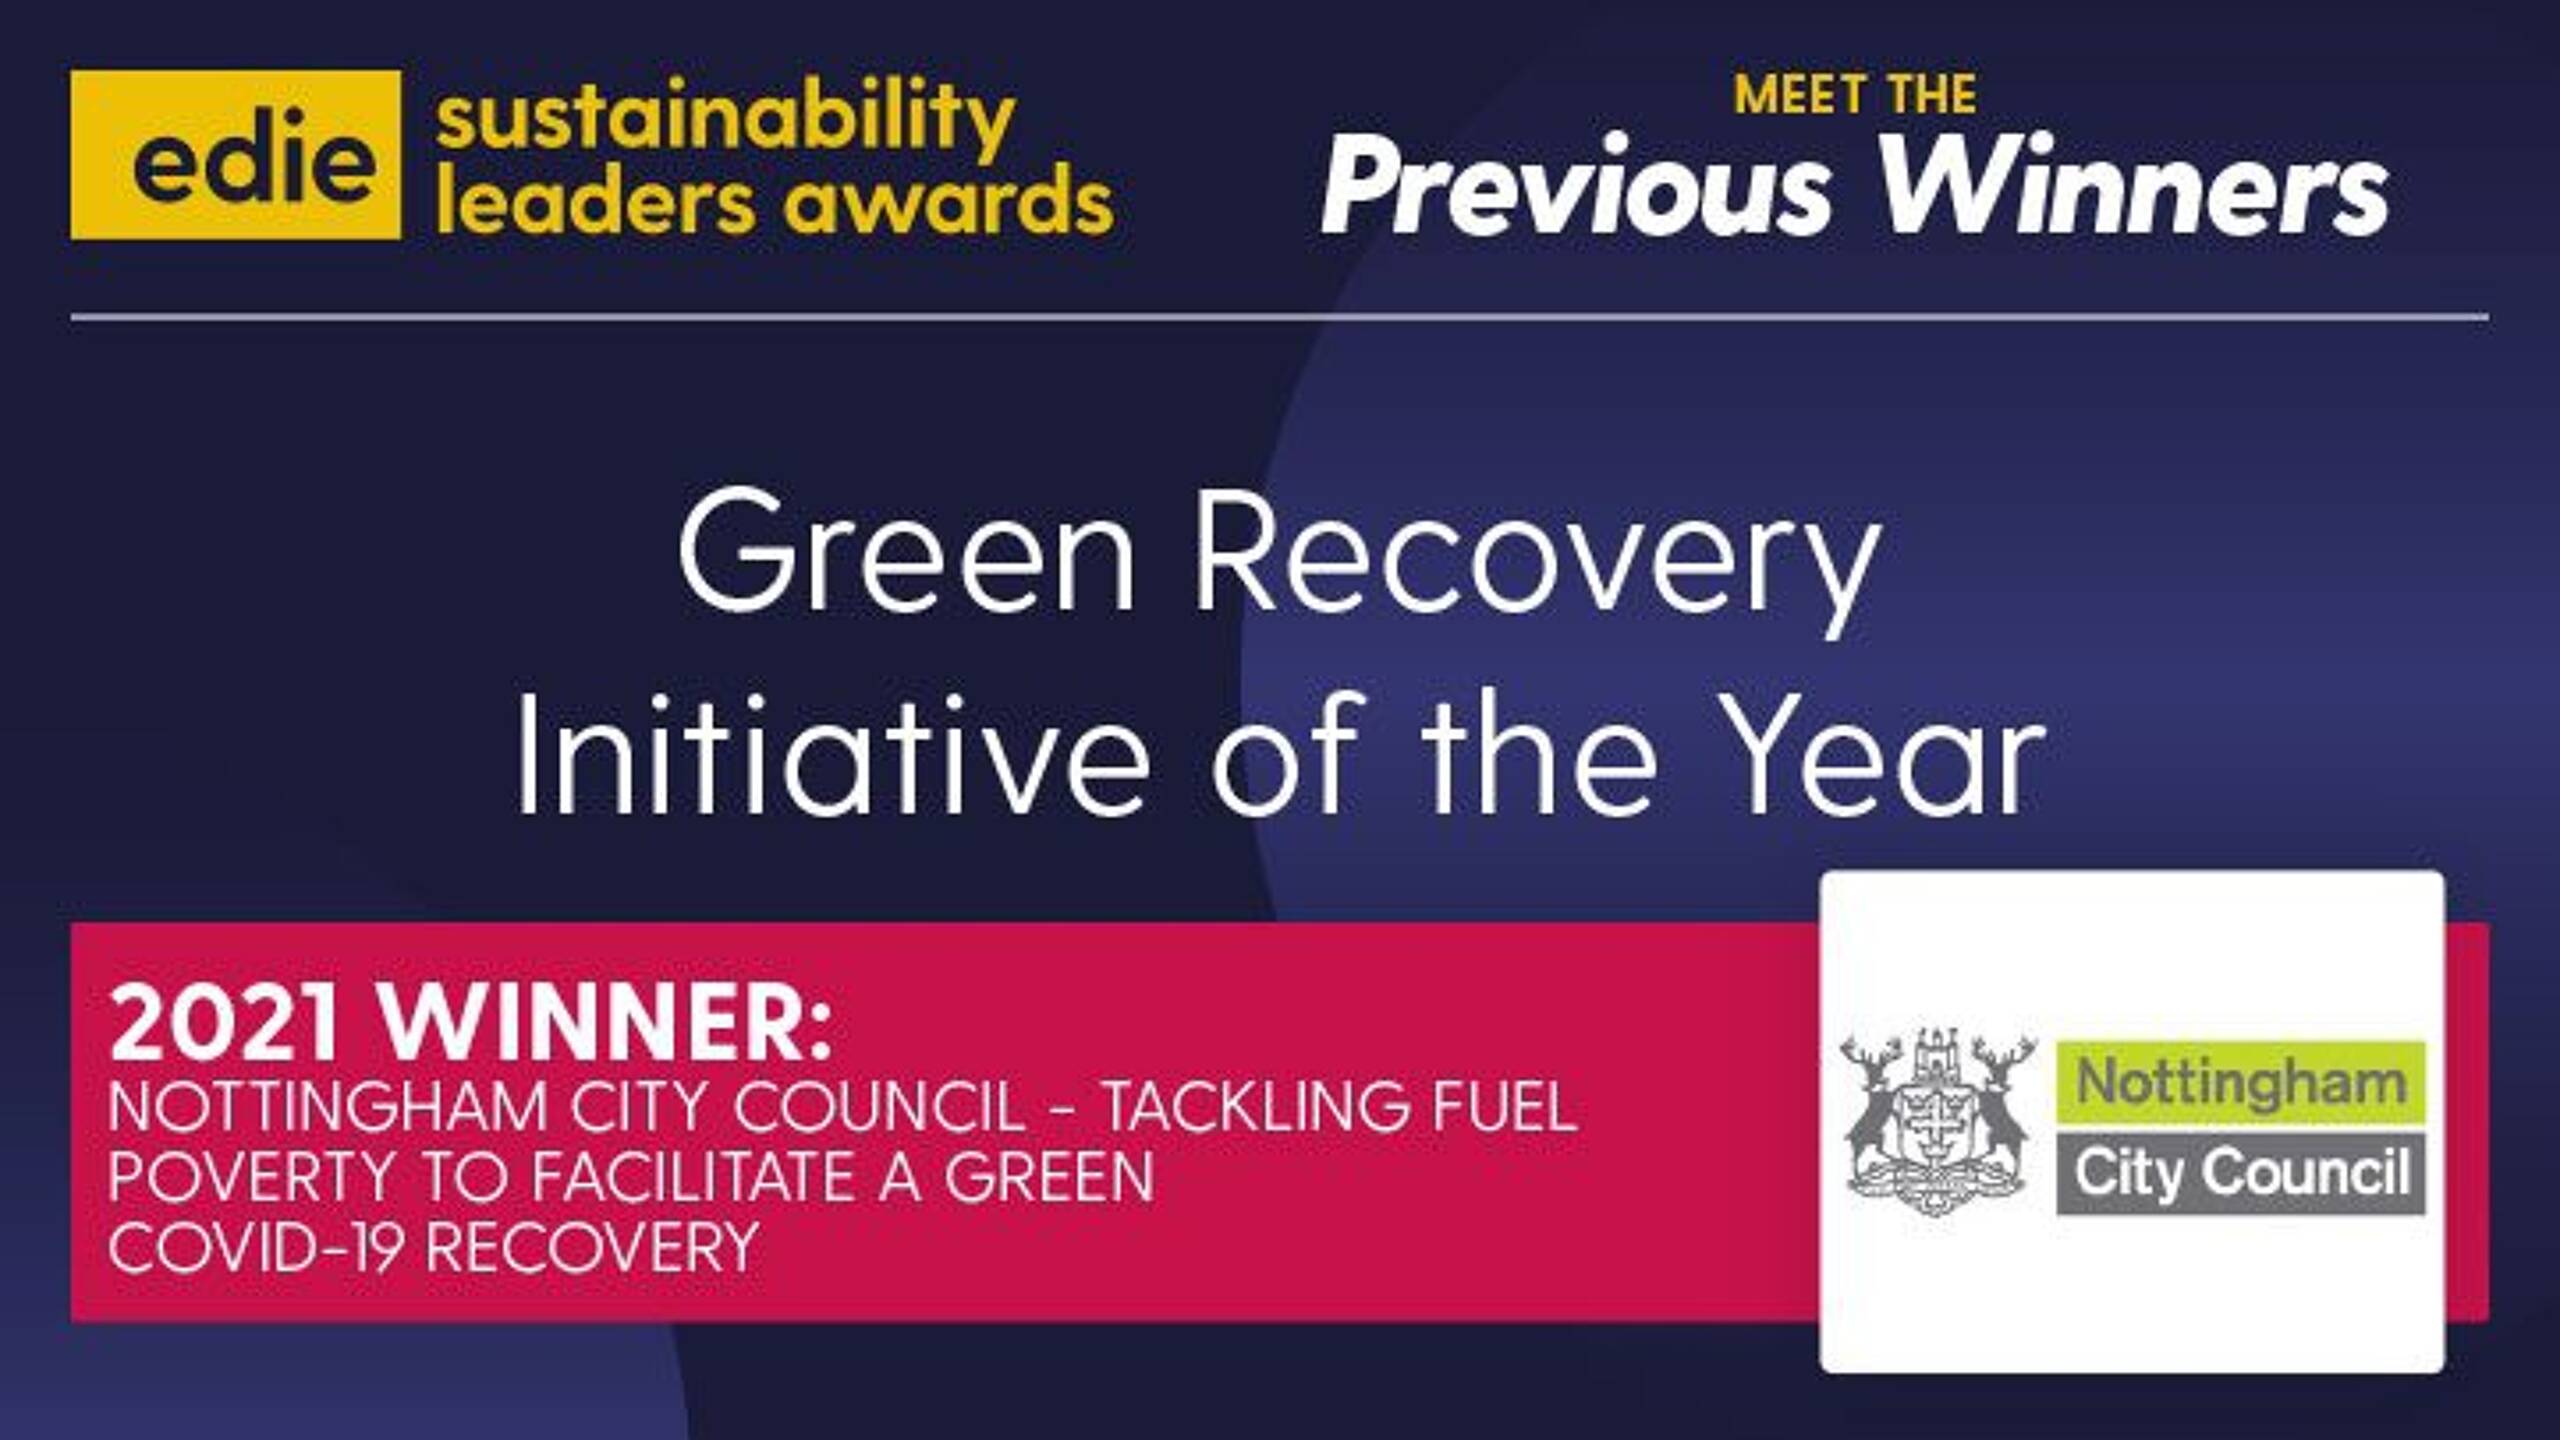 What makes a sustainability leader? Meet green recovery champions Nottingham City Council